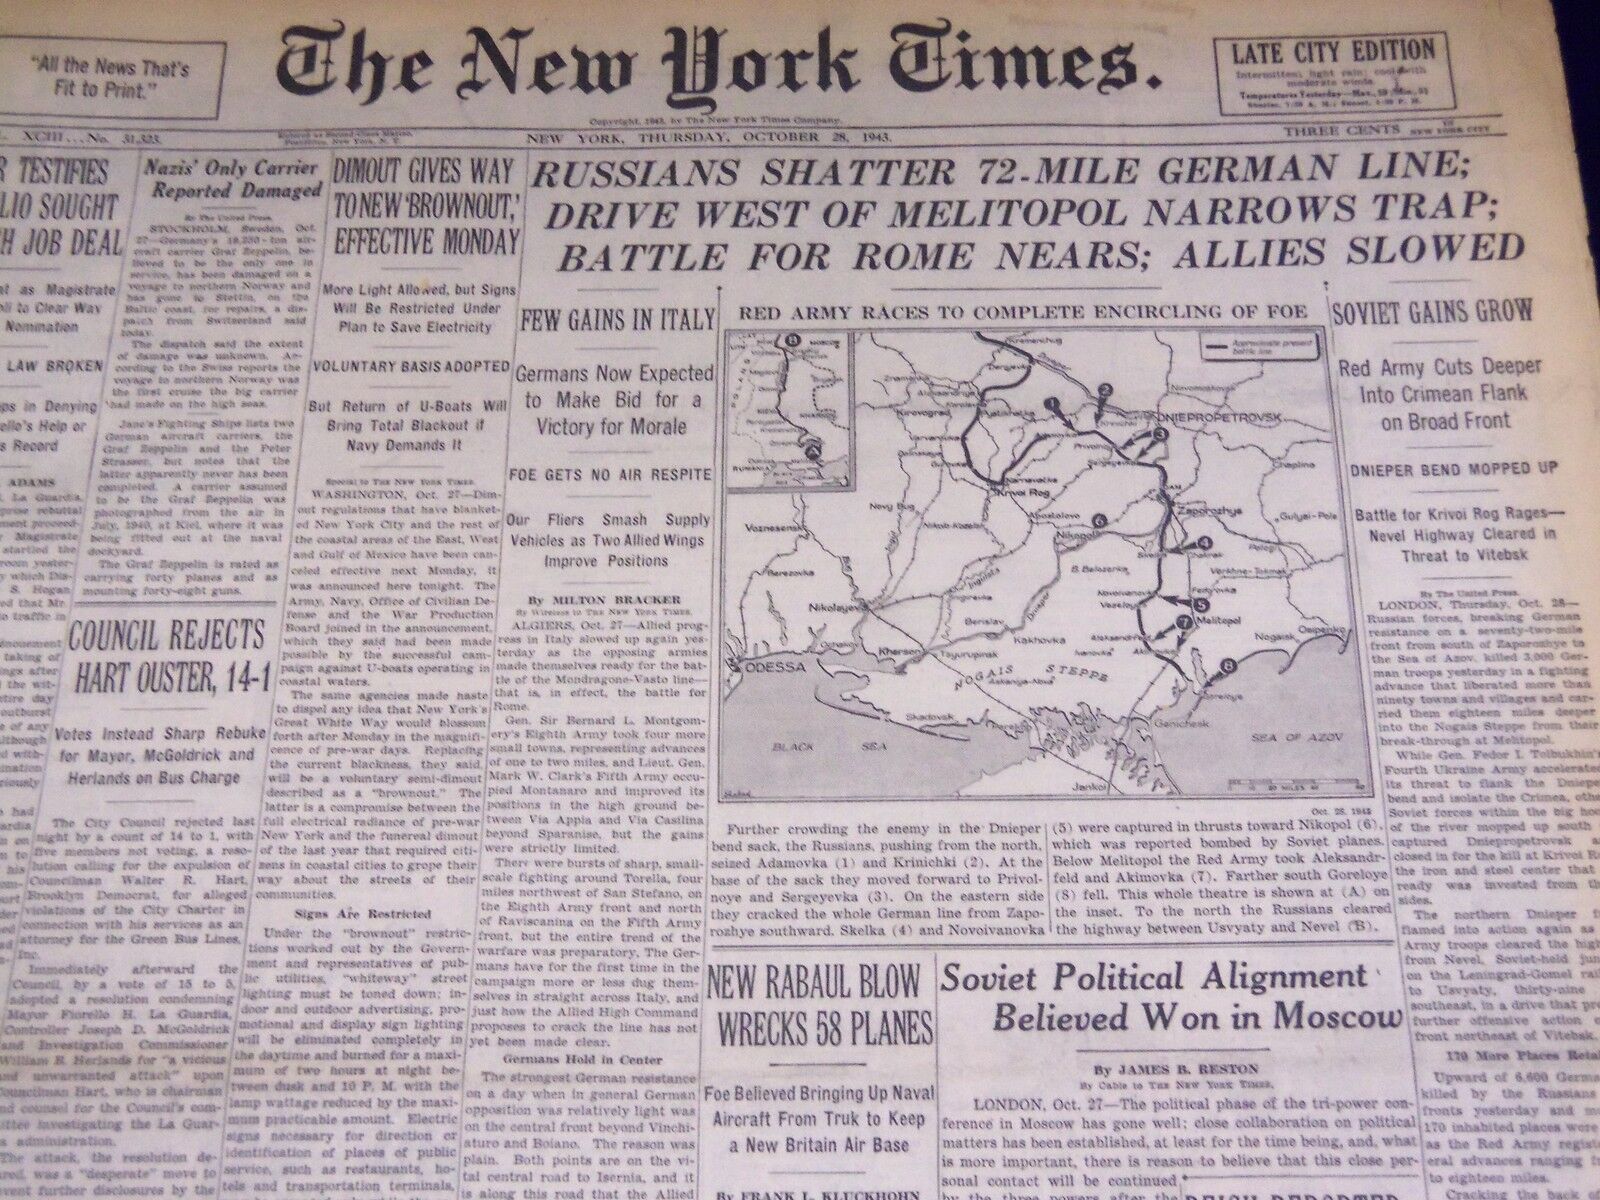 1943 OCTOBER 28 NEW YORK TIMES - RUSSIANS SHATTER 72-MILE GERMAN LINE - NT 1897